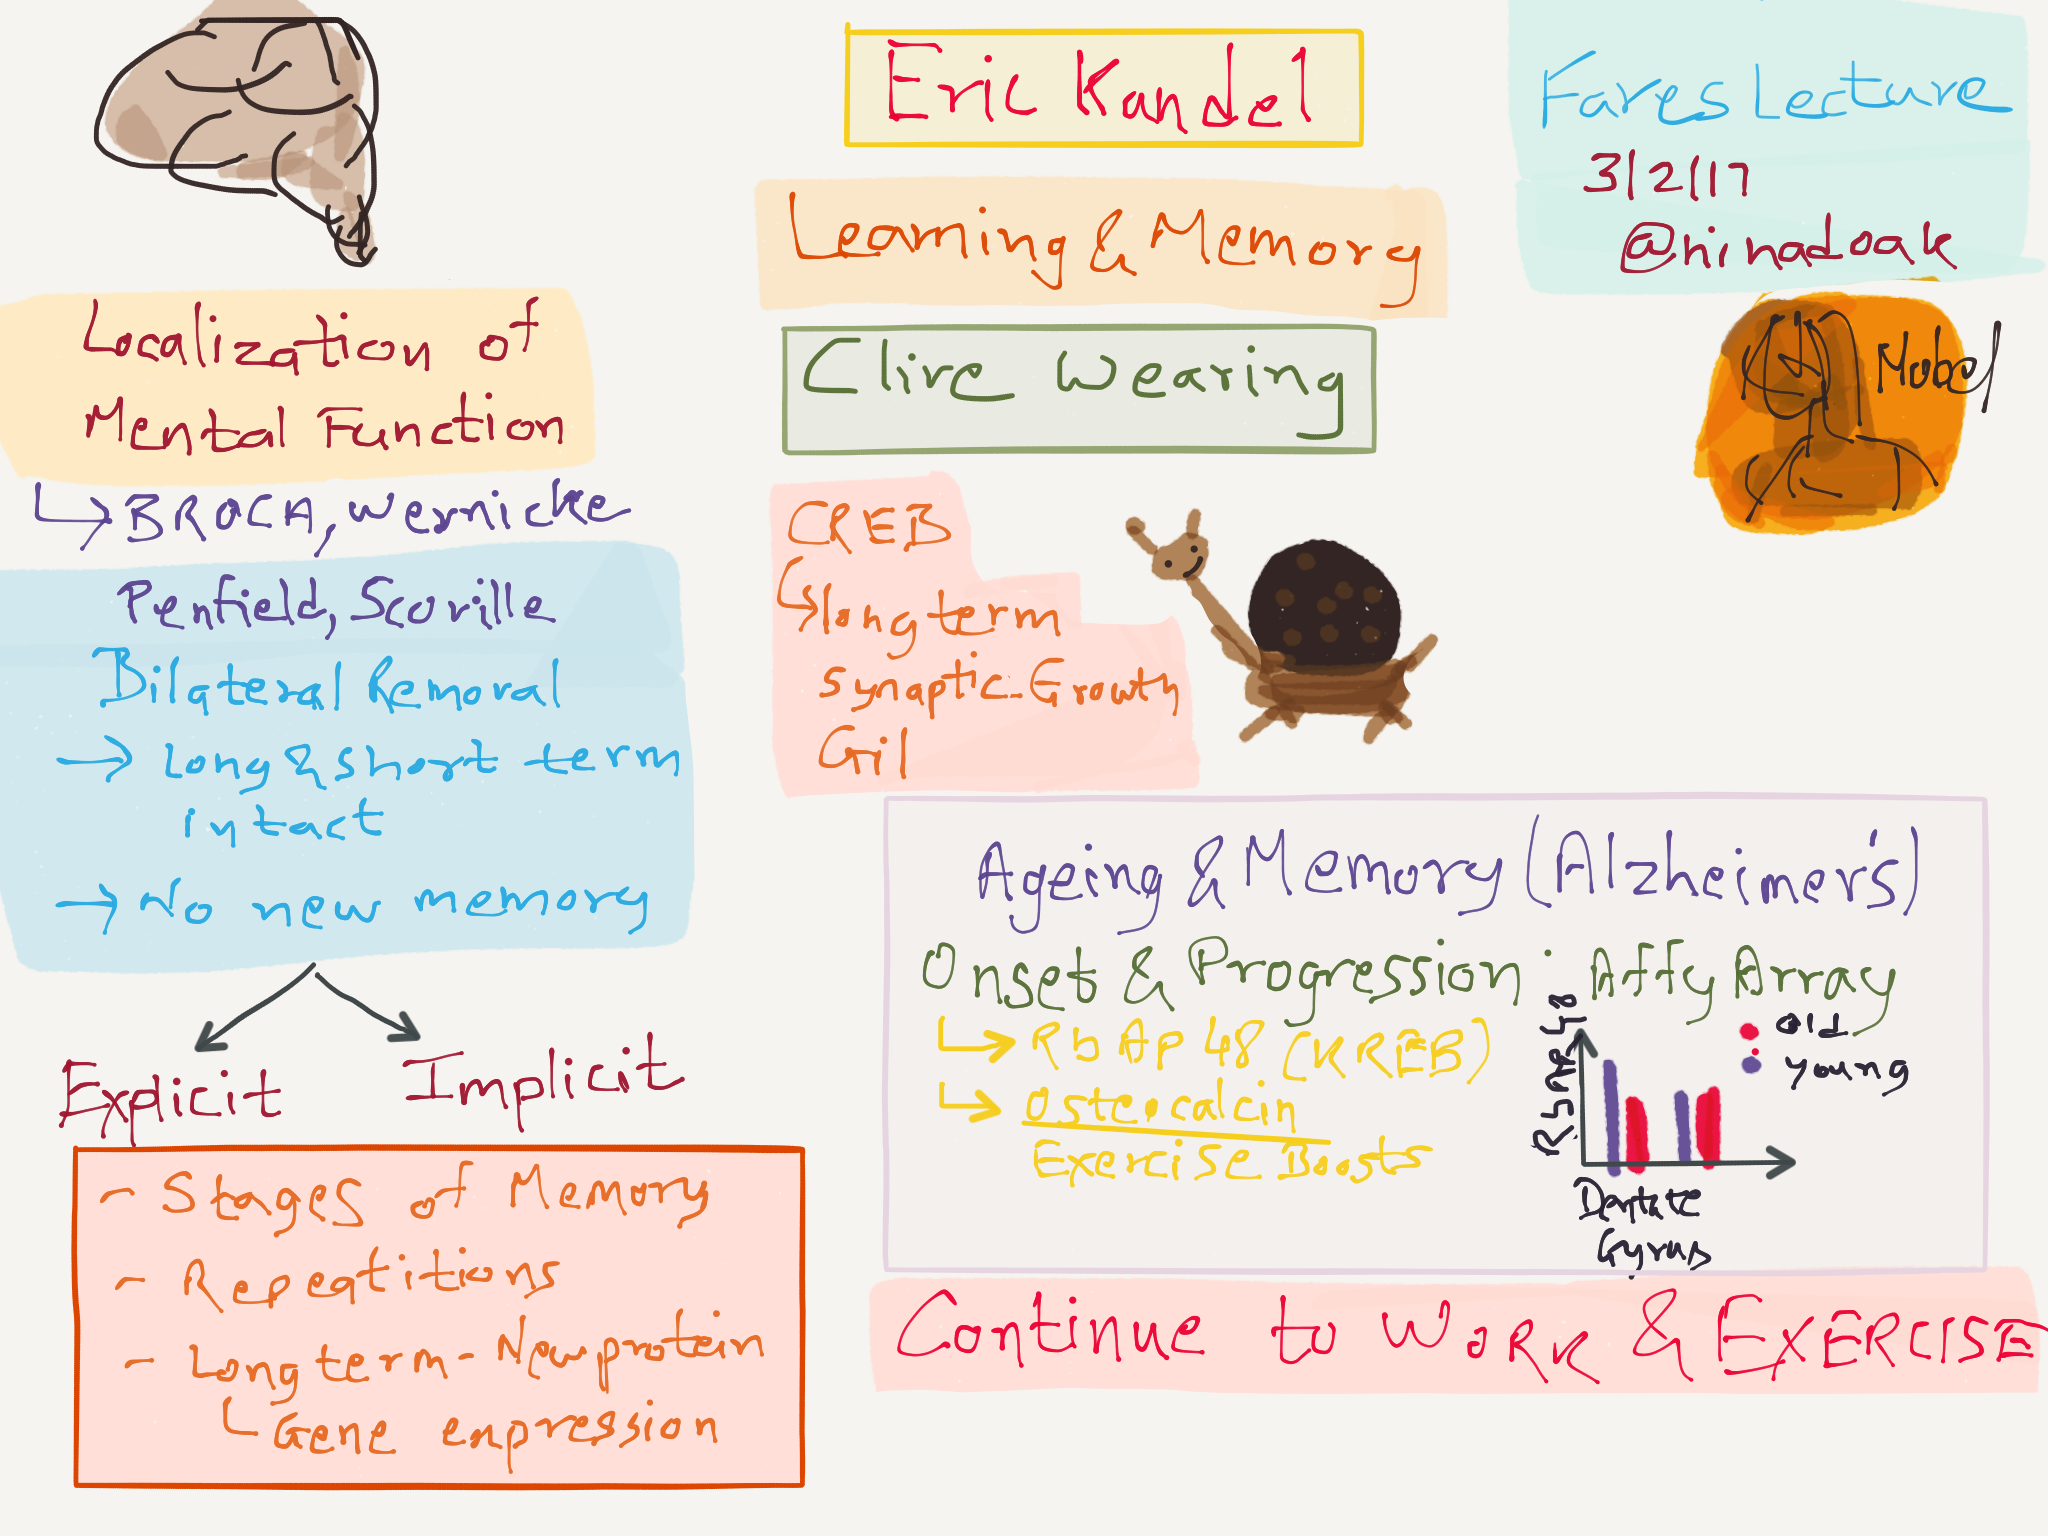 Eric Kandel- Fares Lecture.png